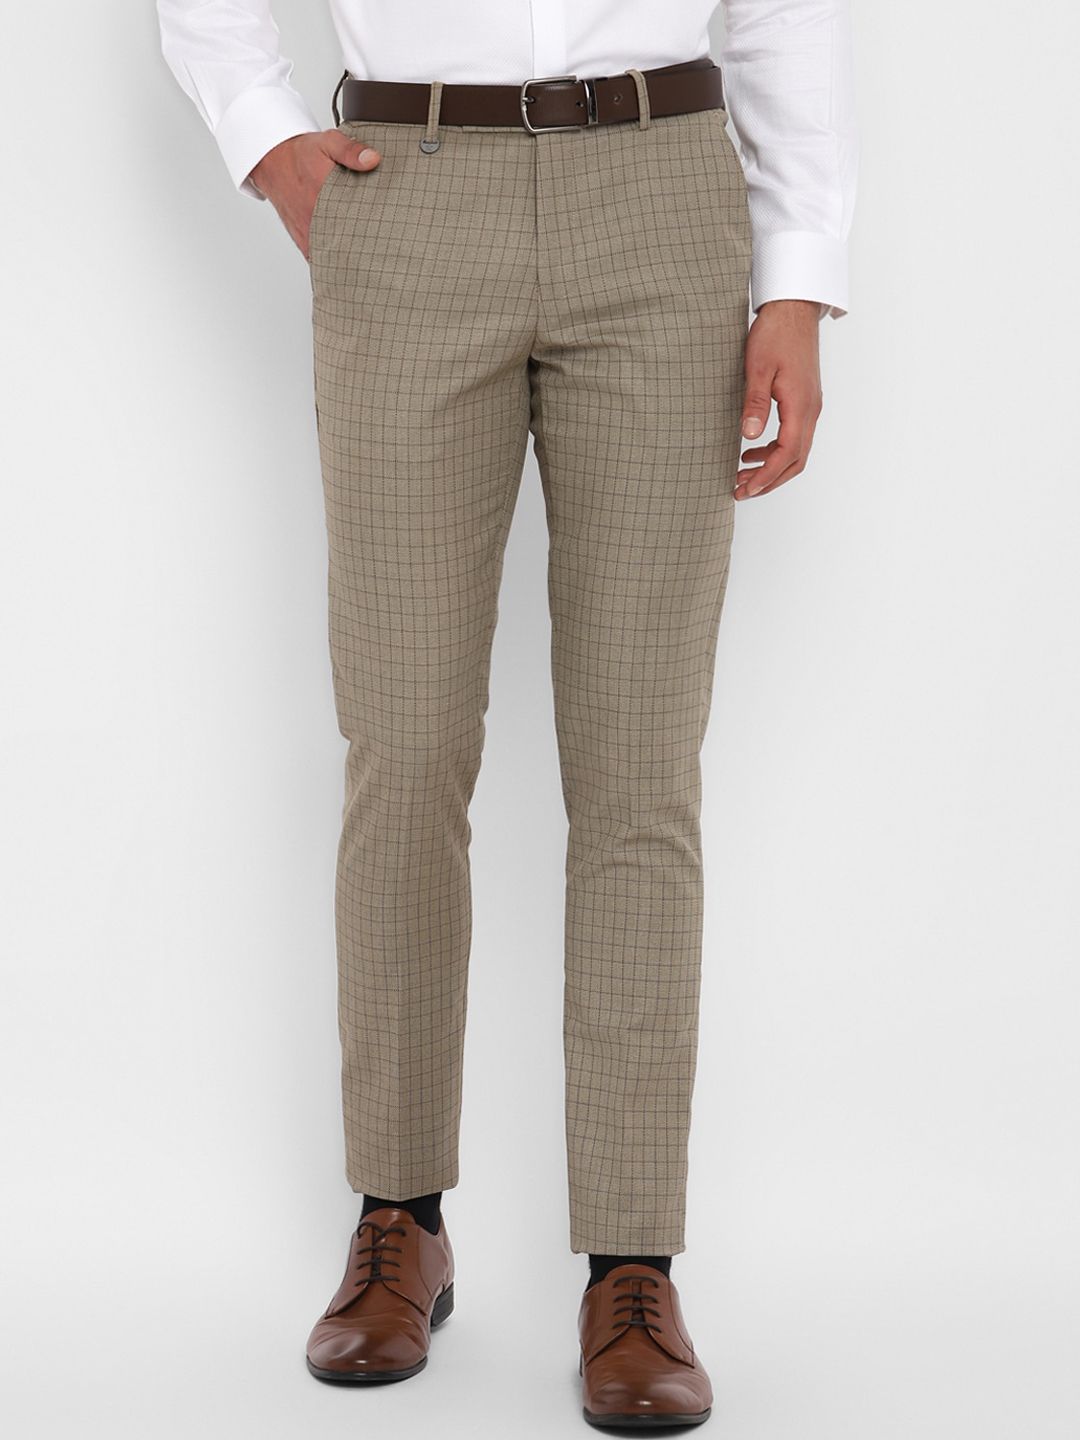 Buy ROYAL ENFIELD Brown Solid Cotton Regular Fit Mens Casual Trousers   Shoppers Stop